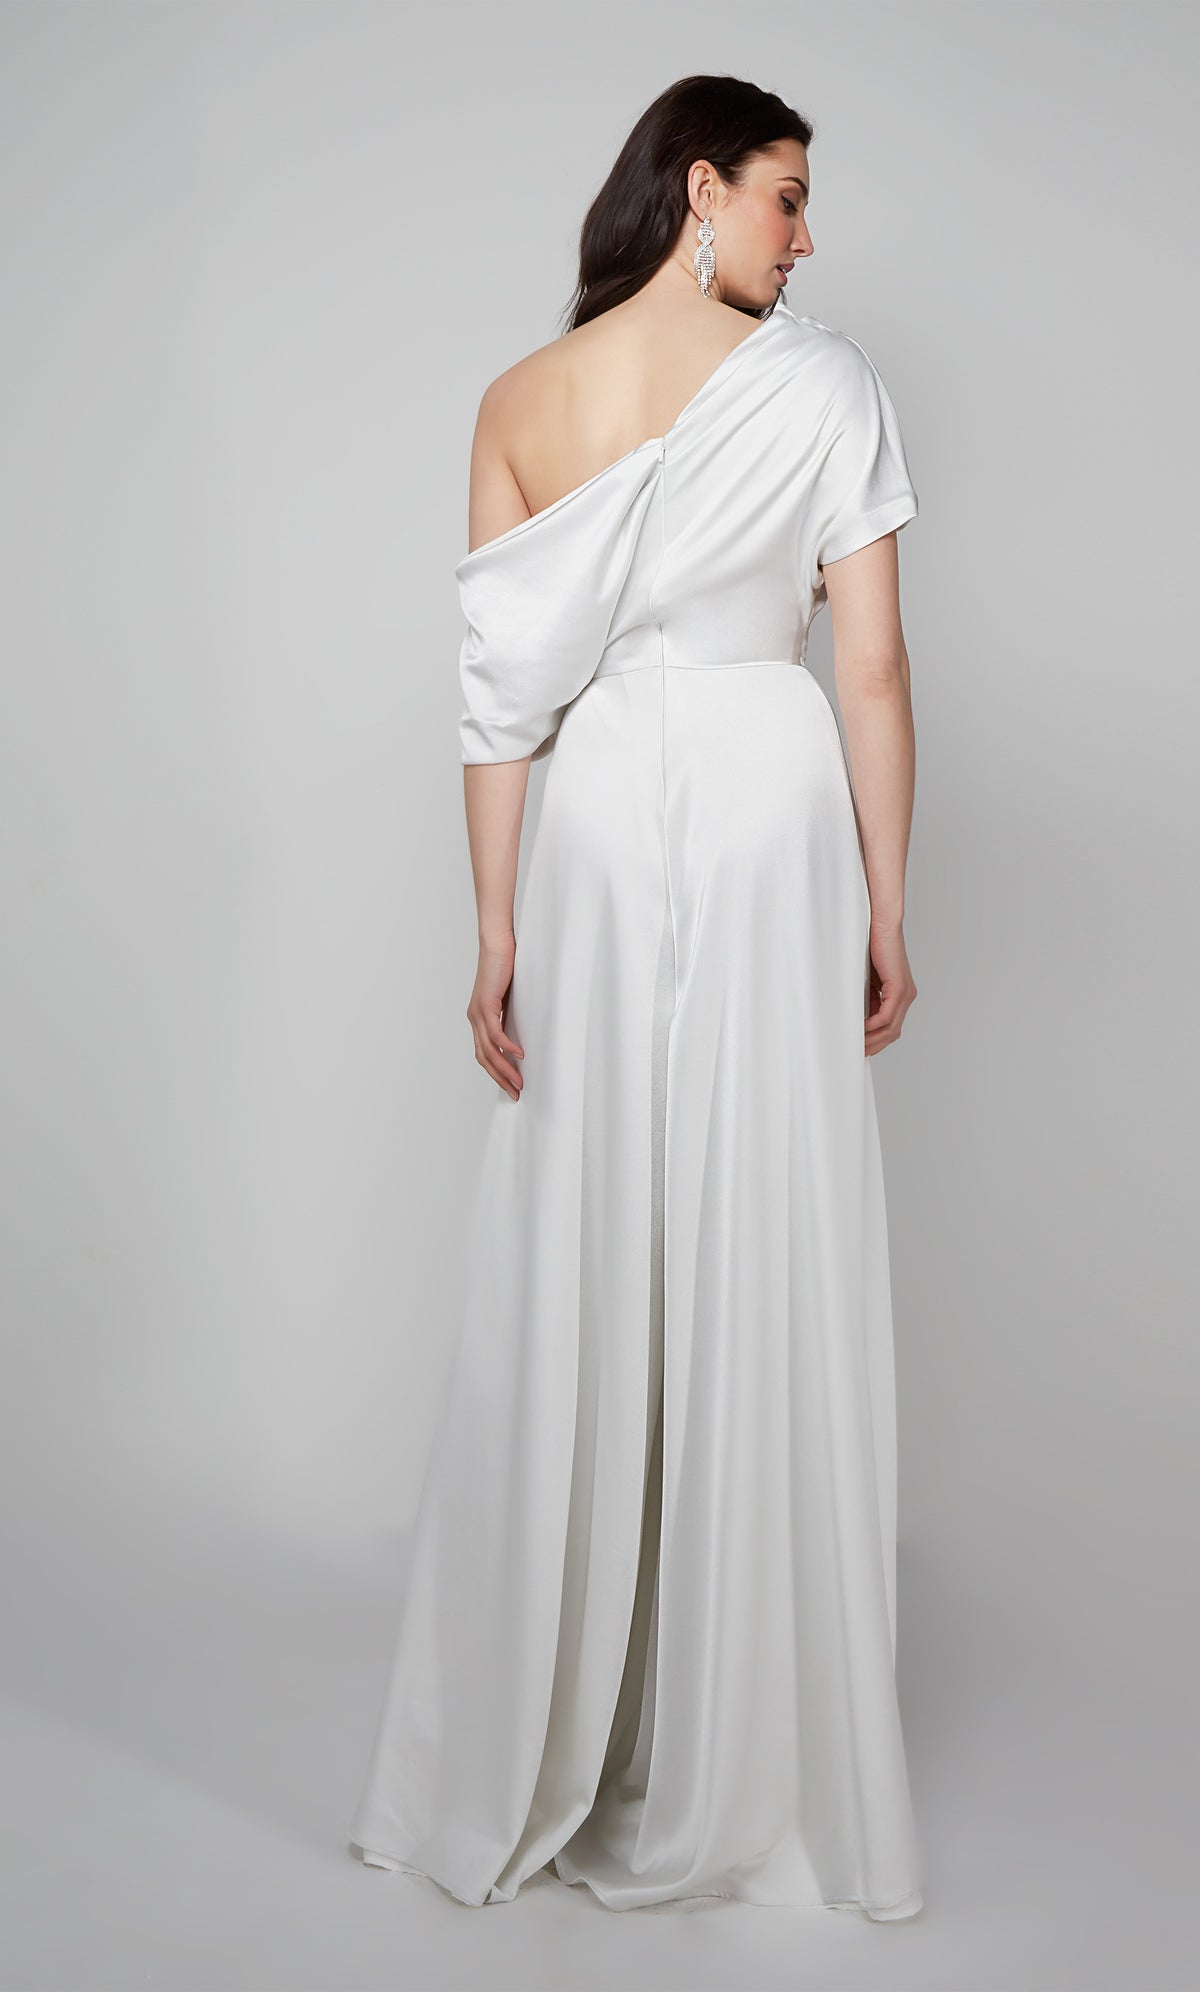 Ivory jumpsuit with a draped one shoulder bodice and zip up back.